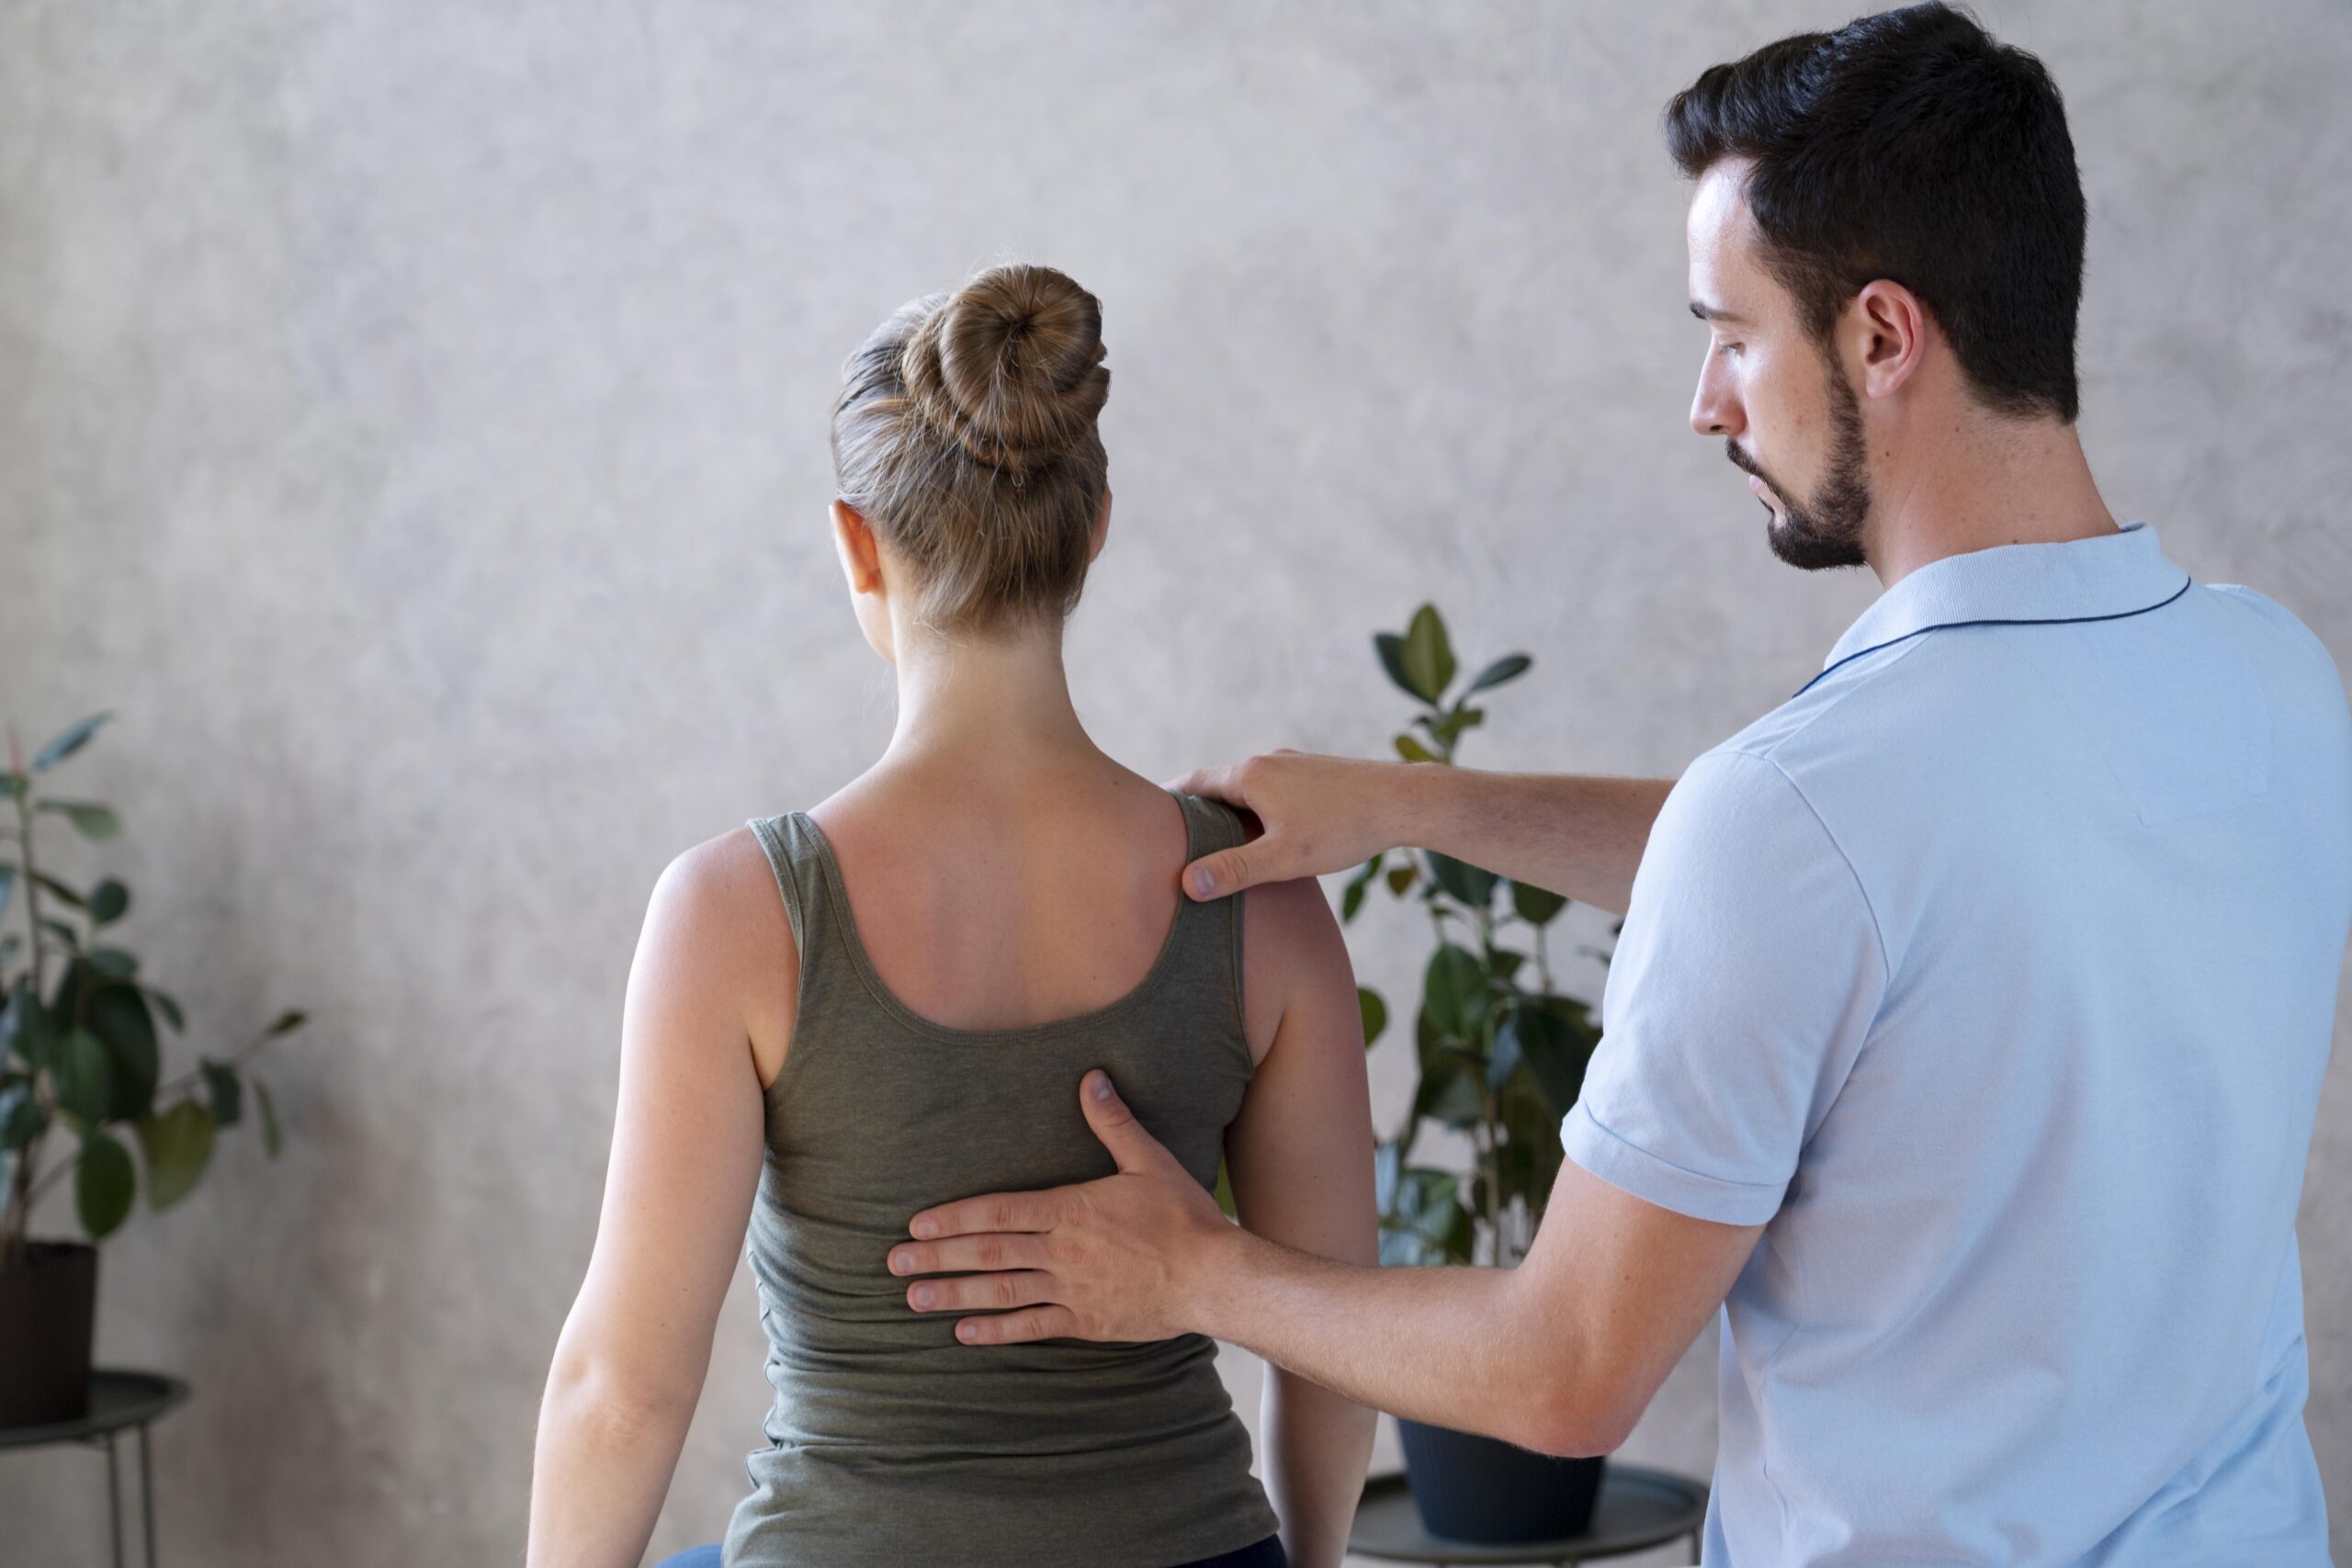 Easing Lower Back Pain & Sciatica: Chiropractic & Exercises